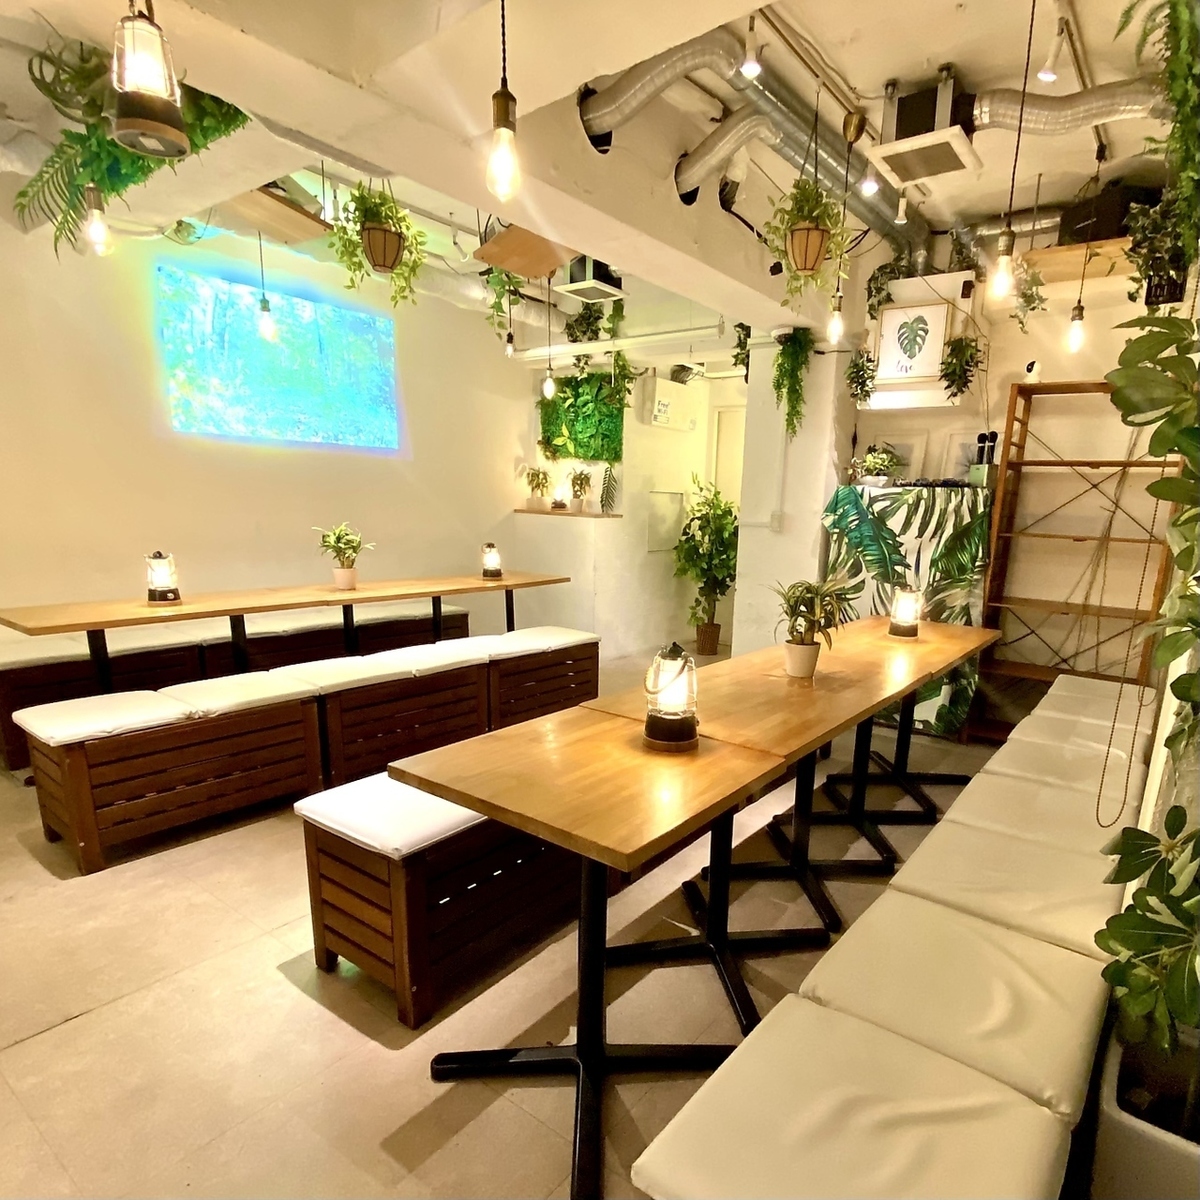 Reservation party in Shibuya Recommended for 20-30 people